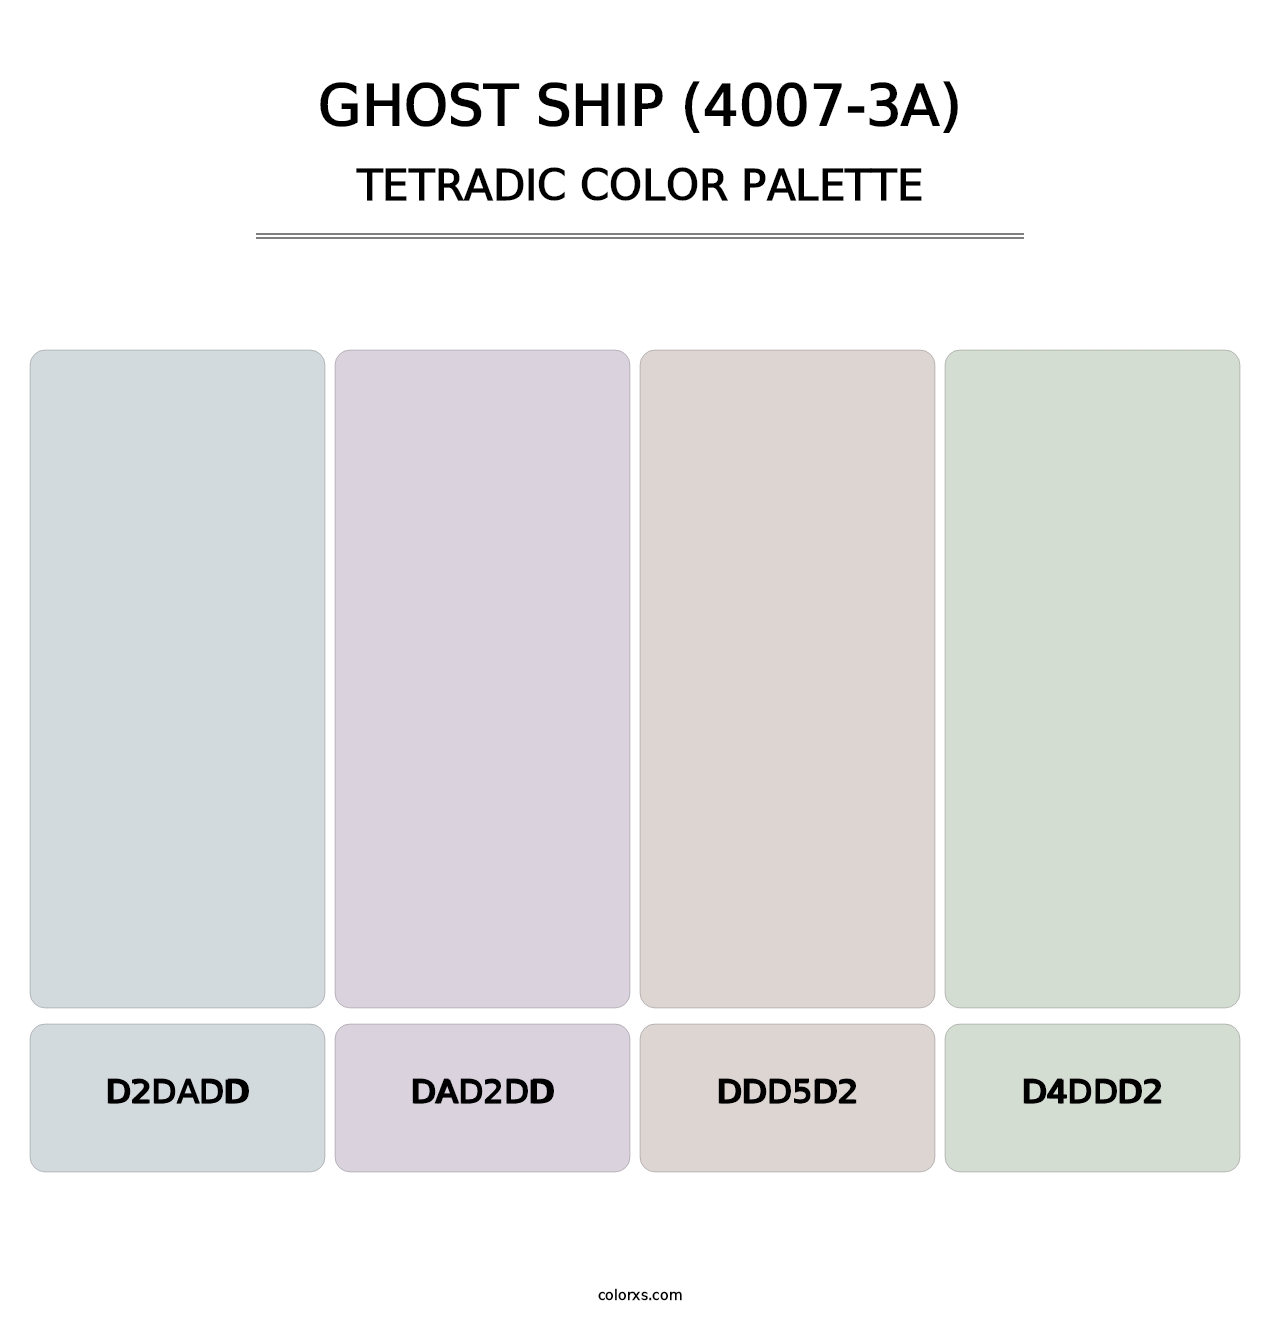 Ghost Ship (4007-3A) - Tetradic Color Palette